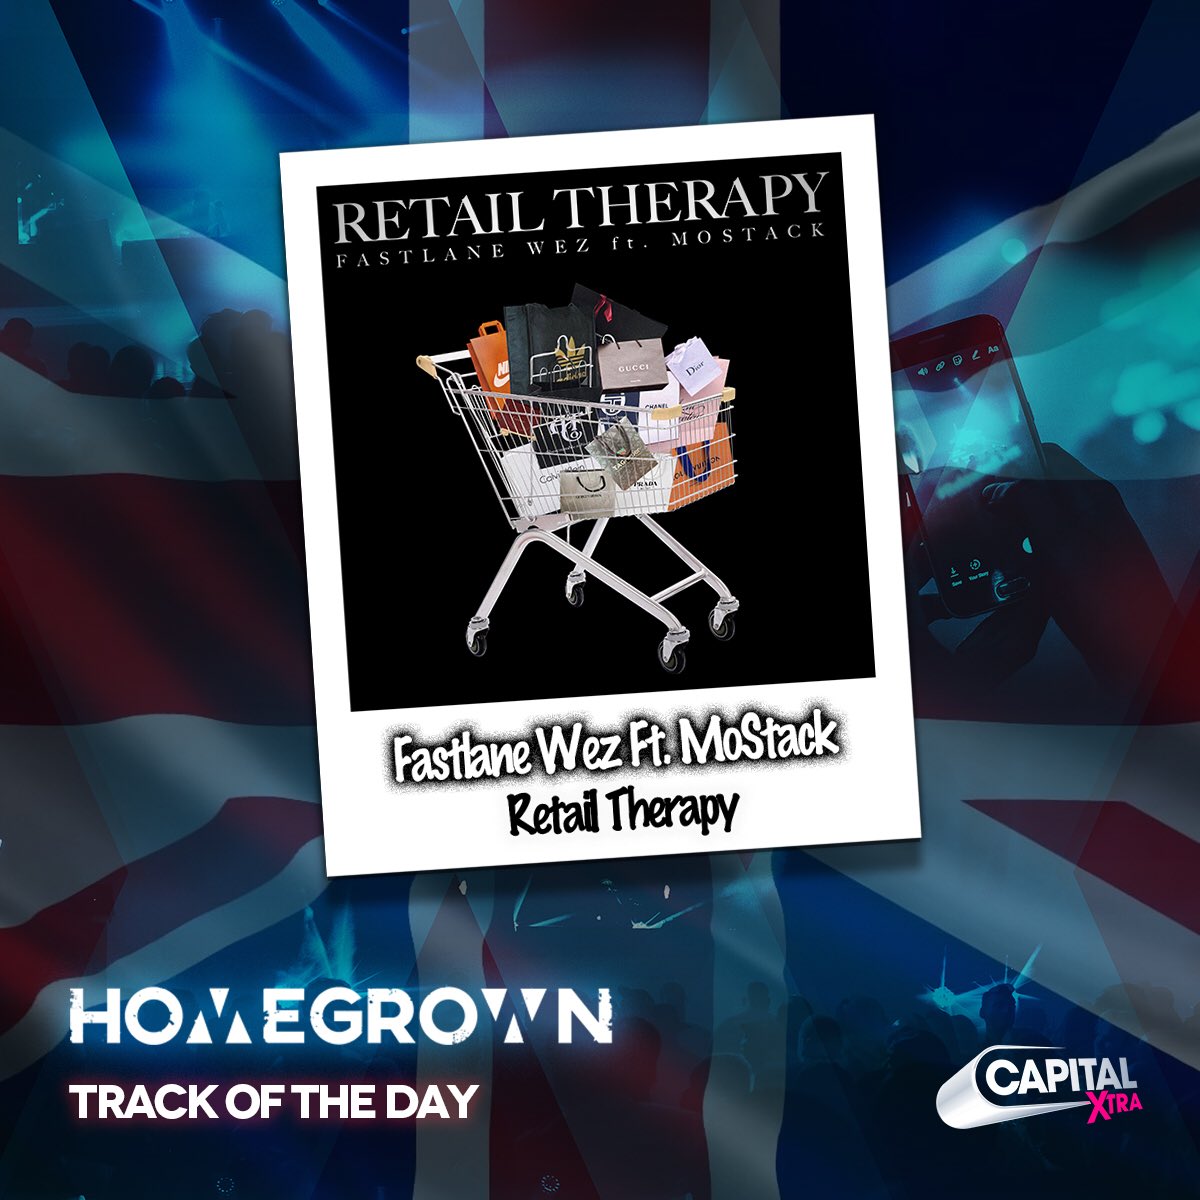 Big Up @RobBruceK For Making #RetailTherapy Ft @realmostack His #HomeGrownTrackOfTheWeek On @CapitalXTRA ❤️👊🏾🙏🏾